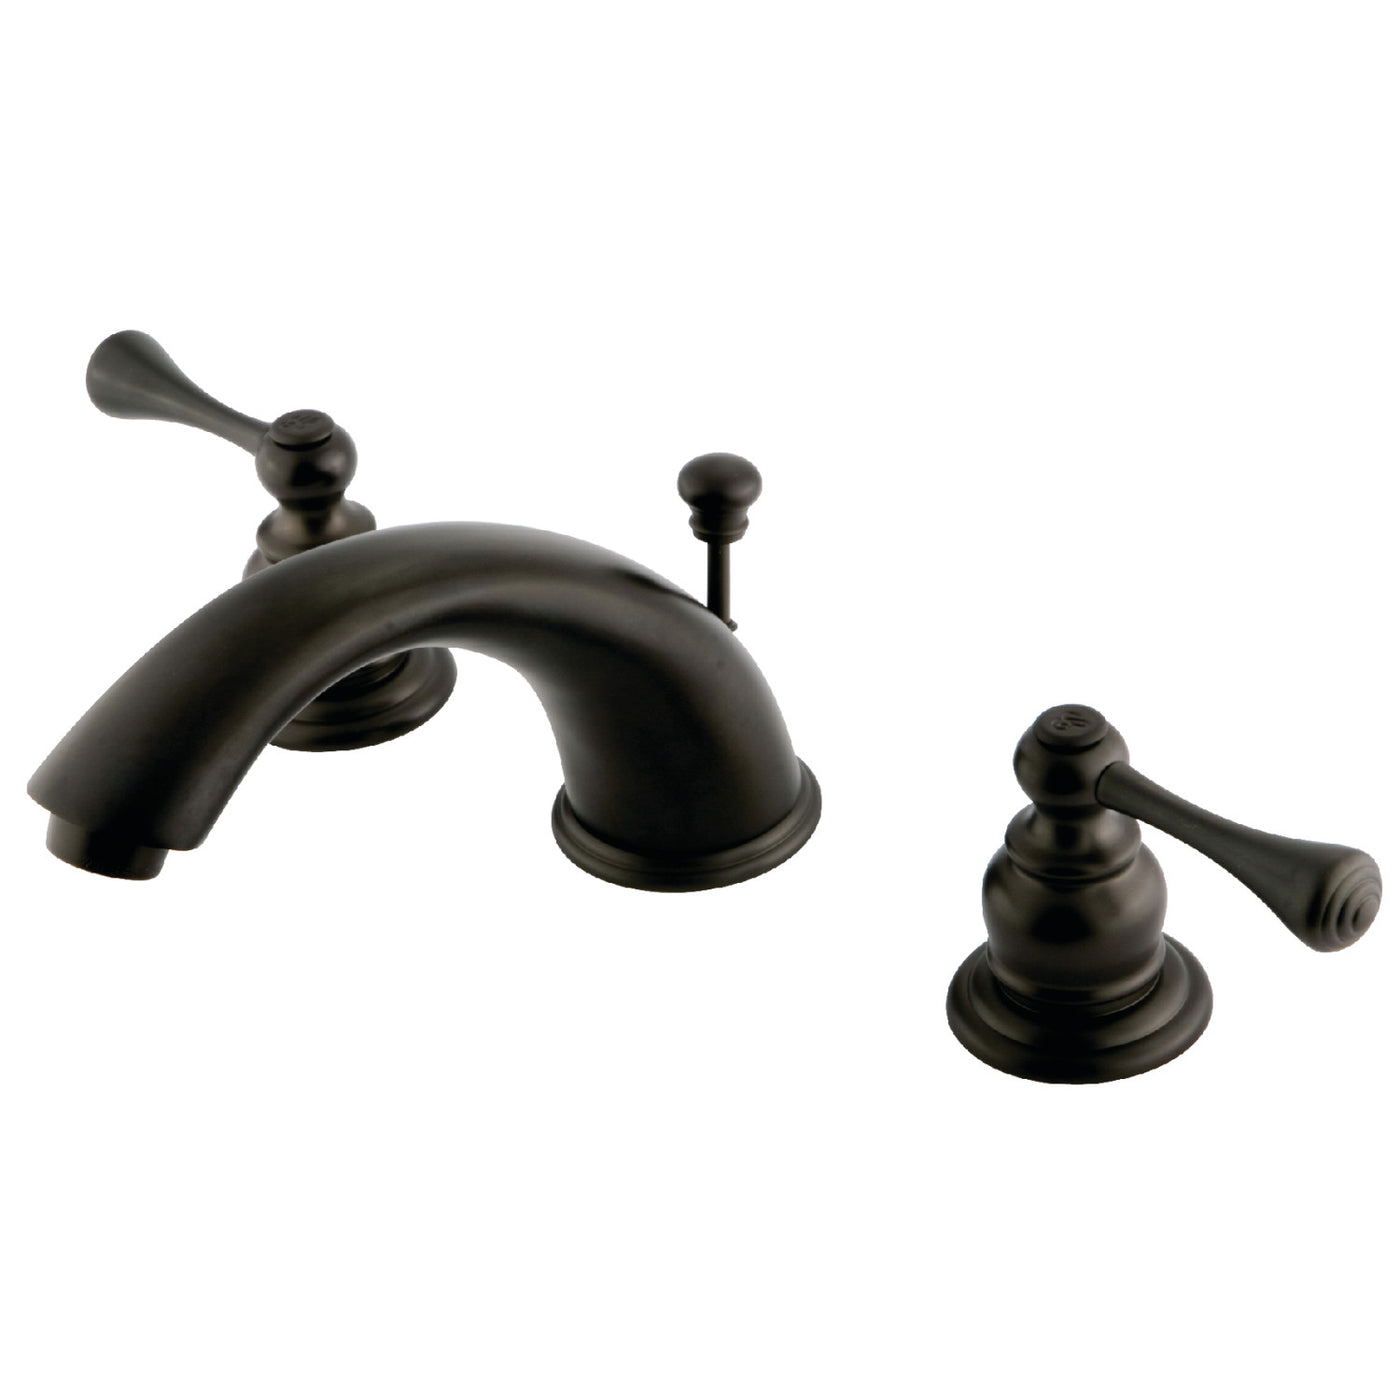 Elements of Design EB3975BL Widespread Bathroom Faucet with Retail Pop-Up, Oil Rubbed Bronze